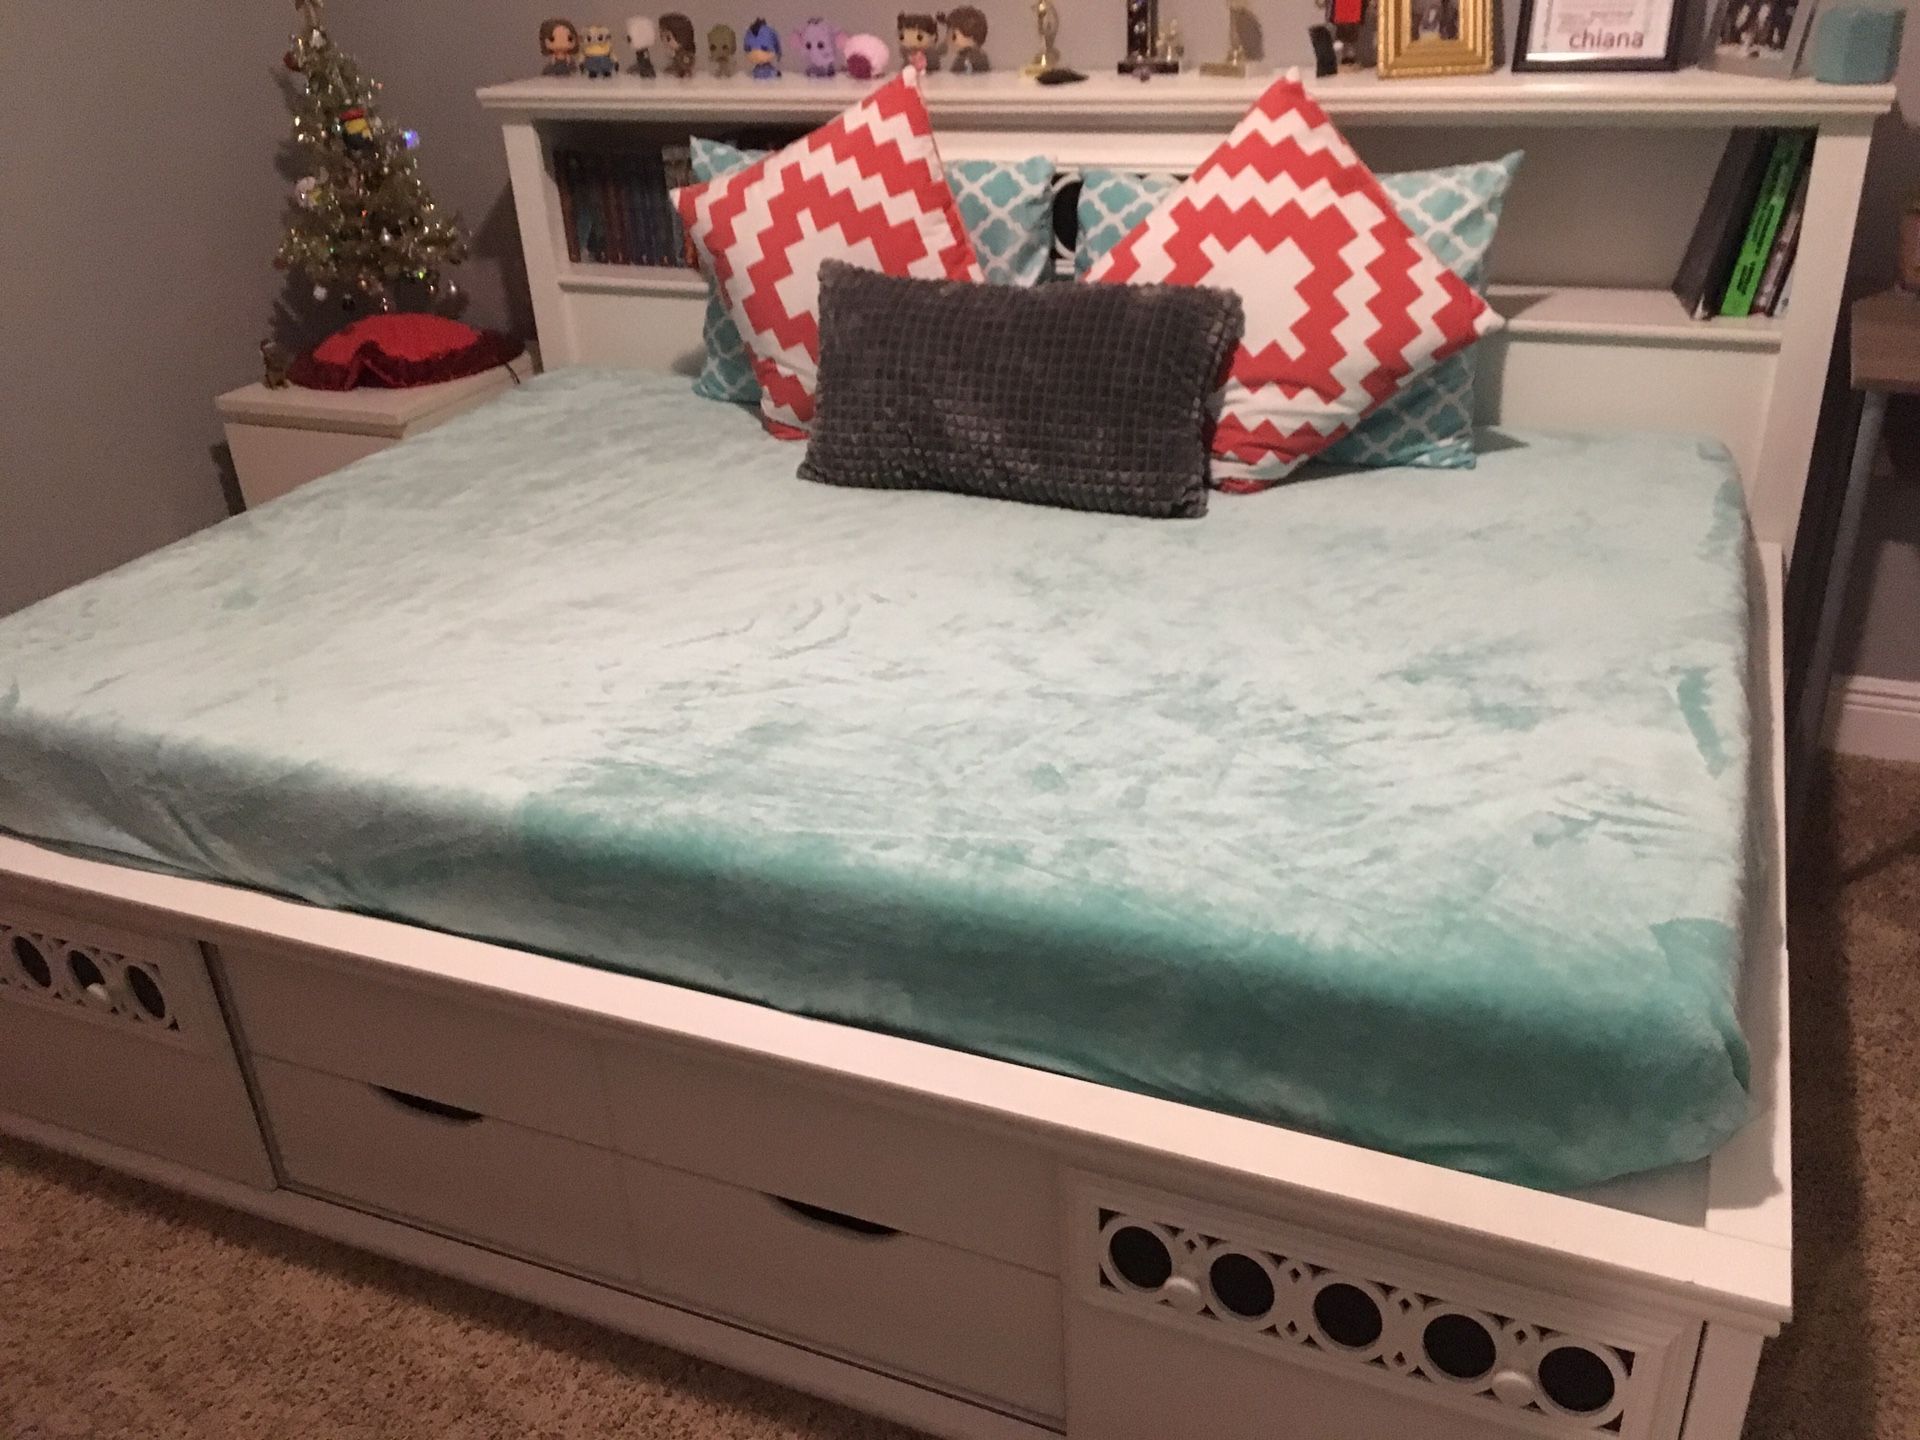 Children’s Full Size Bed with Bookshelves and Storage $375 OBO